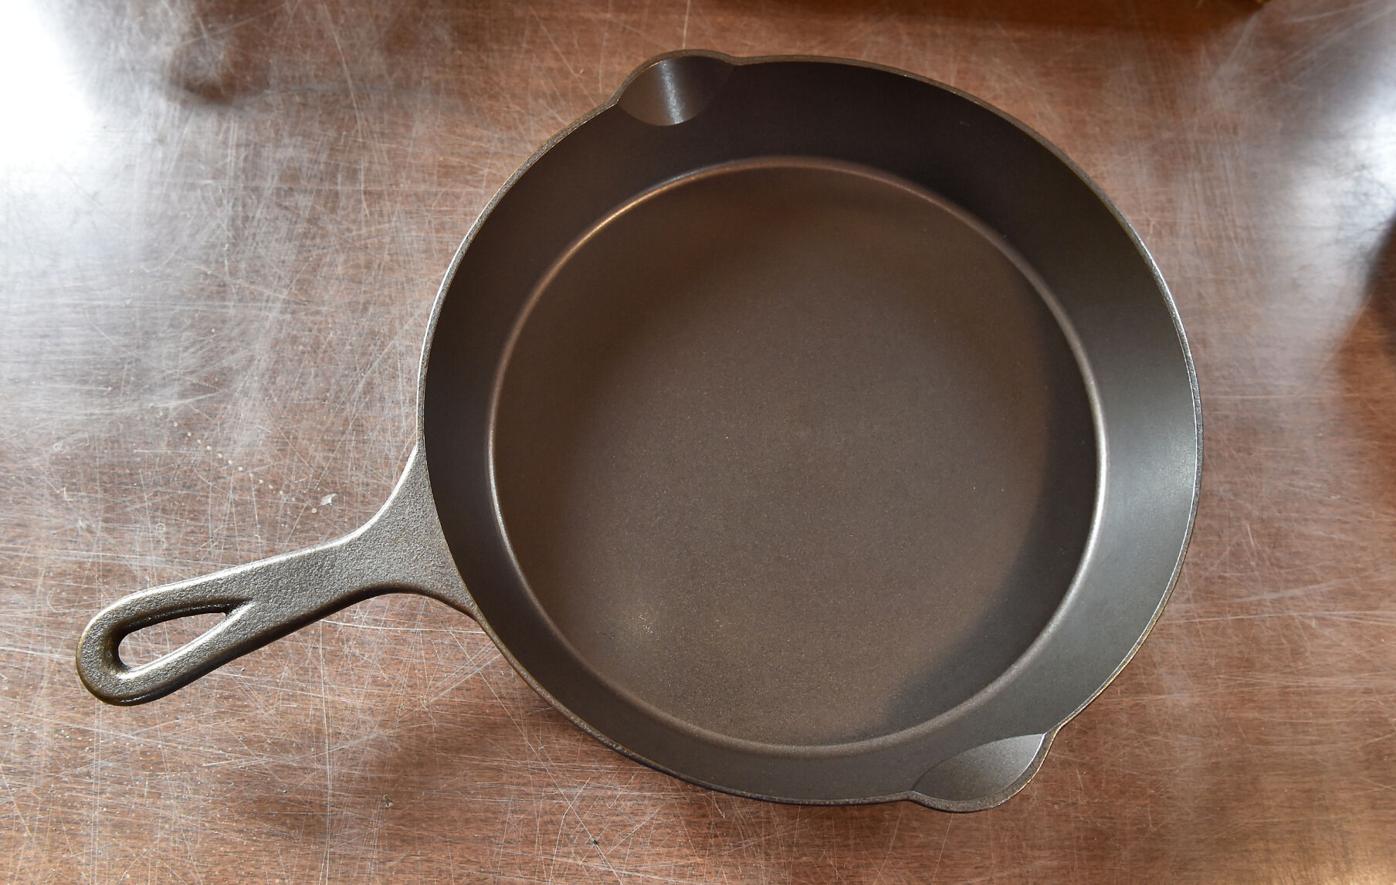 Meet the two men behind the modern made-in-Lancaster County cast-iron  skillet, Life & Culture